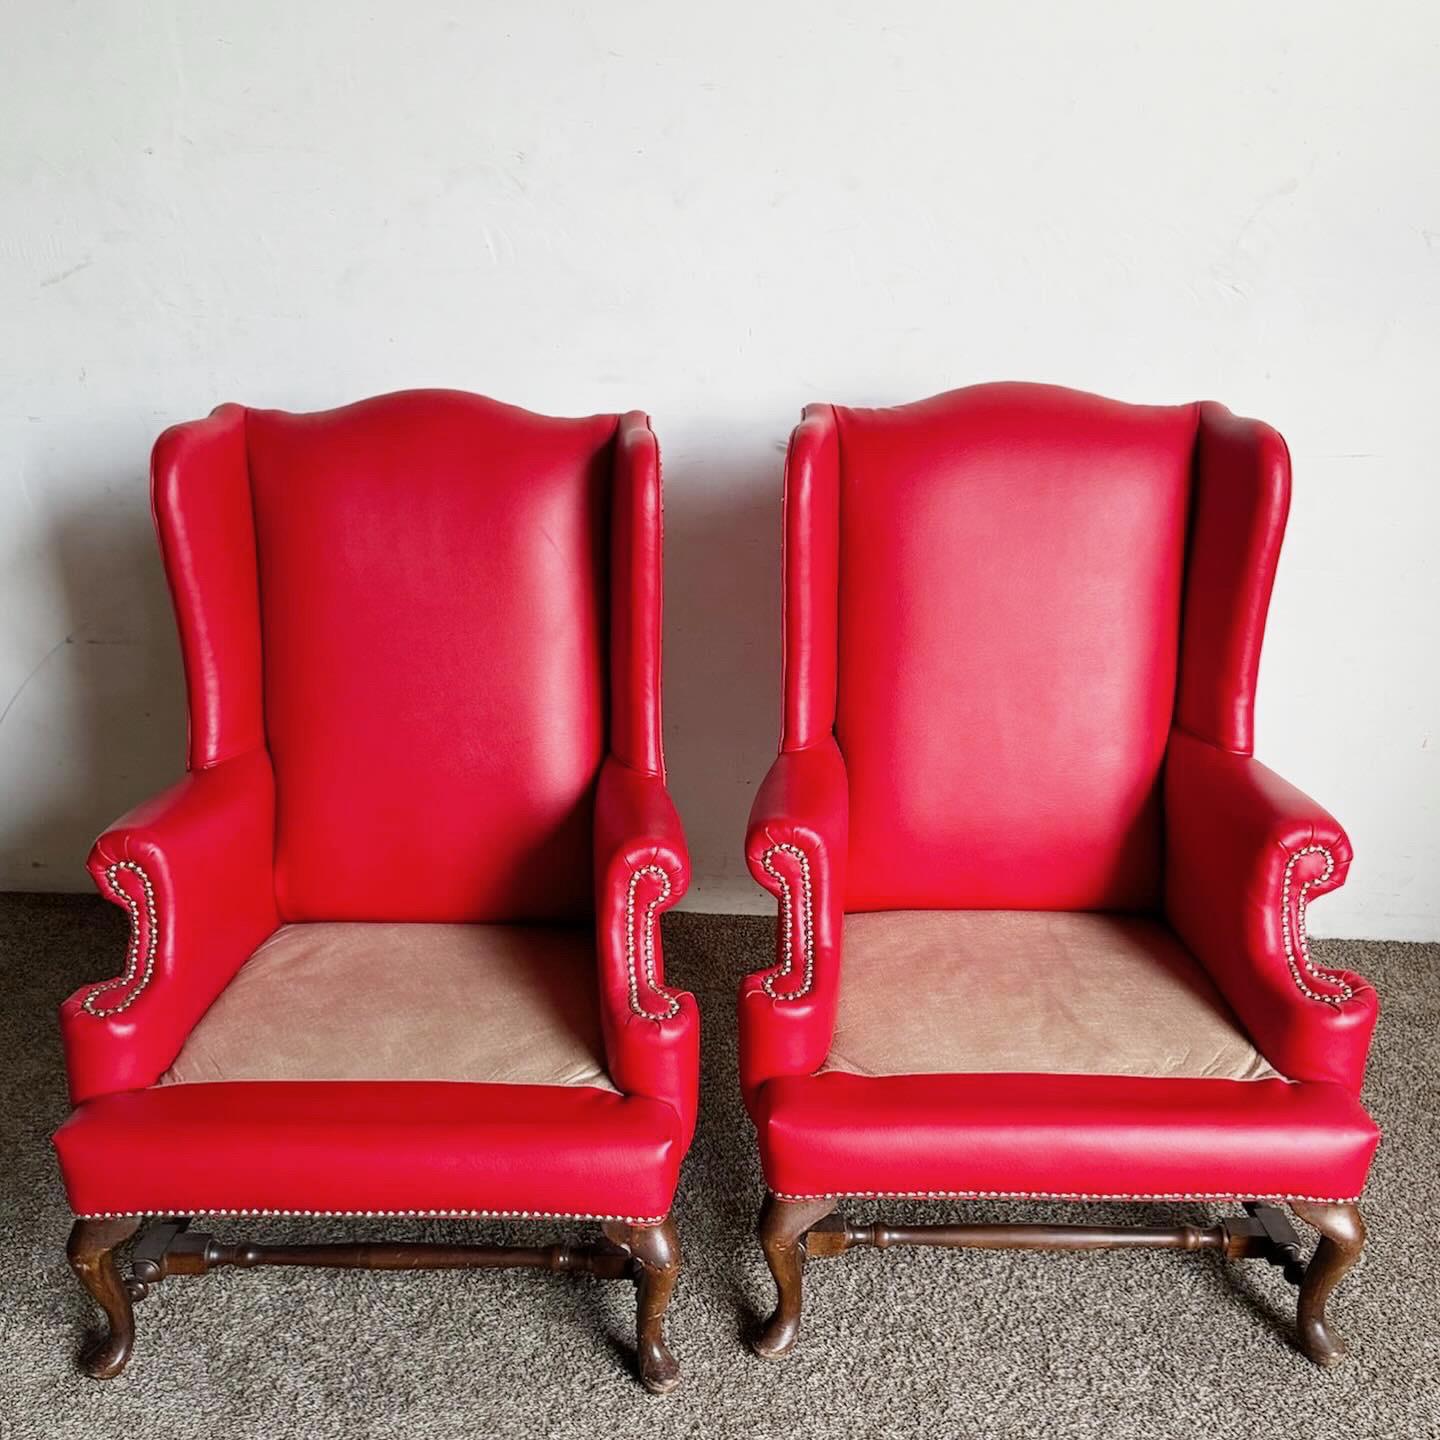 Regency Traditional Red Faux Leather Wingback Chairs - a Pair For Sale